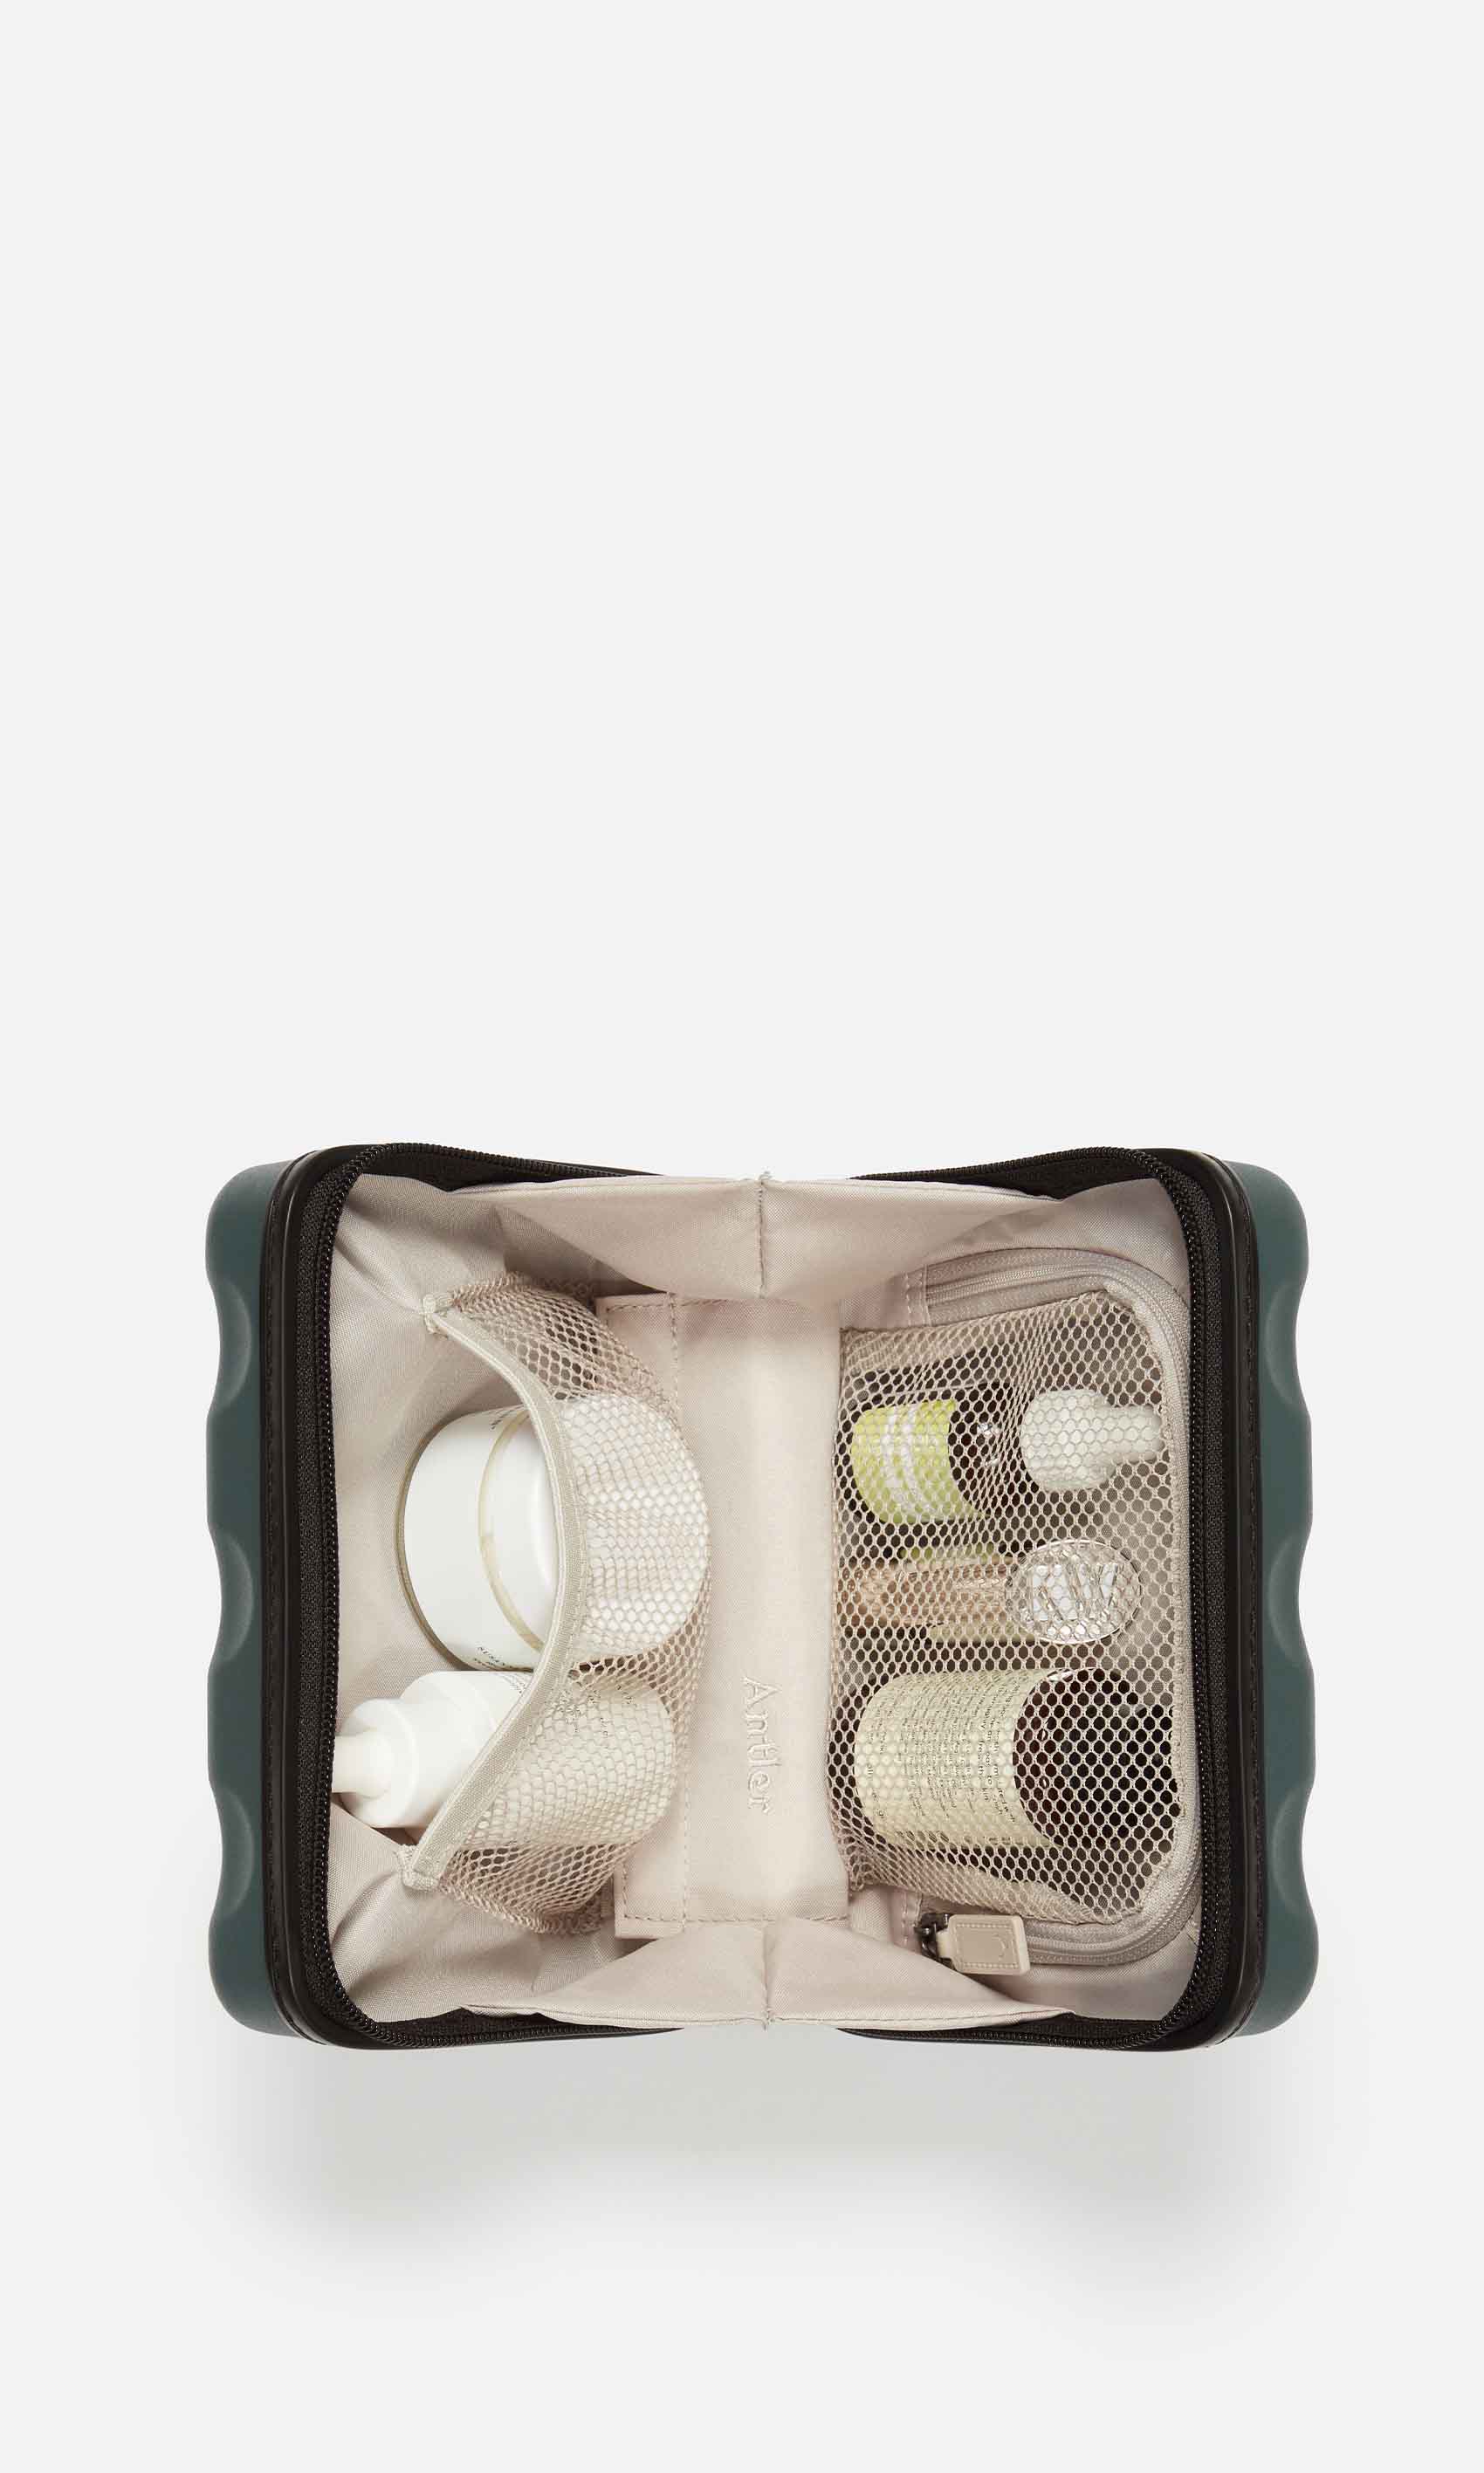 Antler Luggage -  Clifton mini in sycamore - Hard Suitcases Clifton Mini Case Sycamore (Green) | Travel Gifts & Accessories | Antler